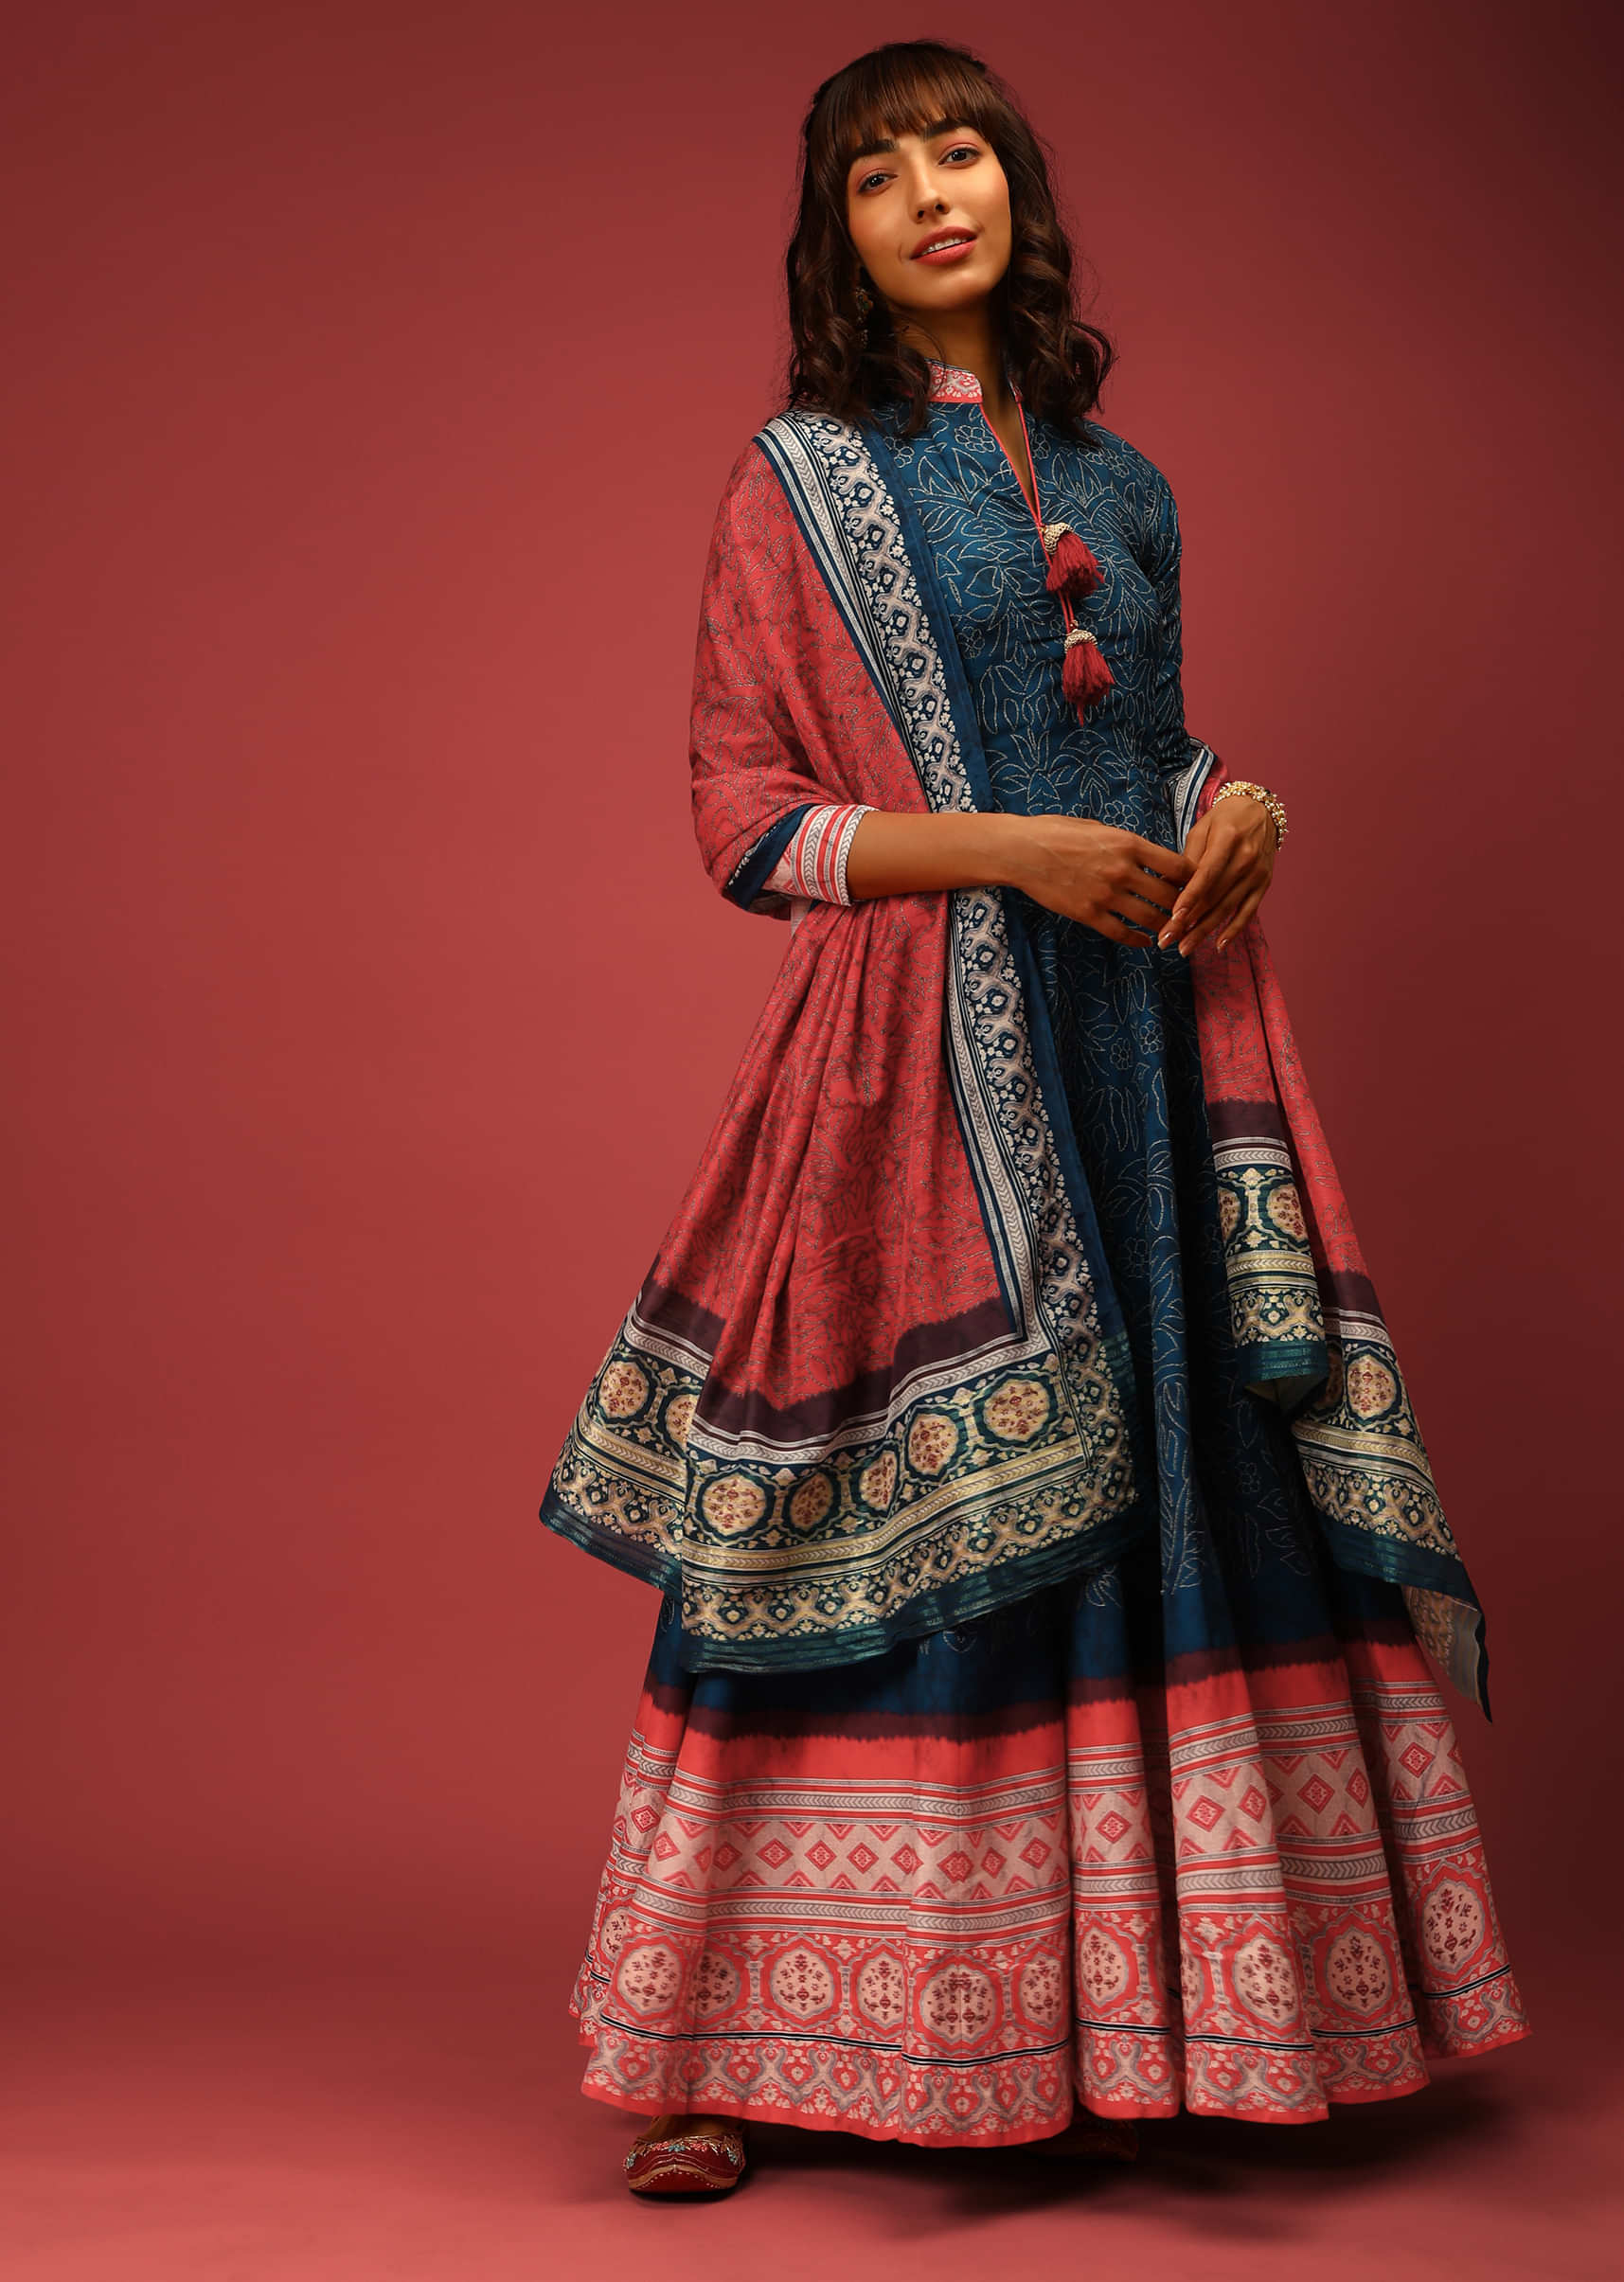 Yale Blue Anarkali Suit In Silk With Floral Jaal And Contrasting Red Border With Ethnic Print  